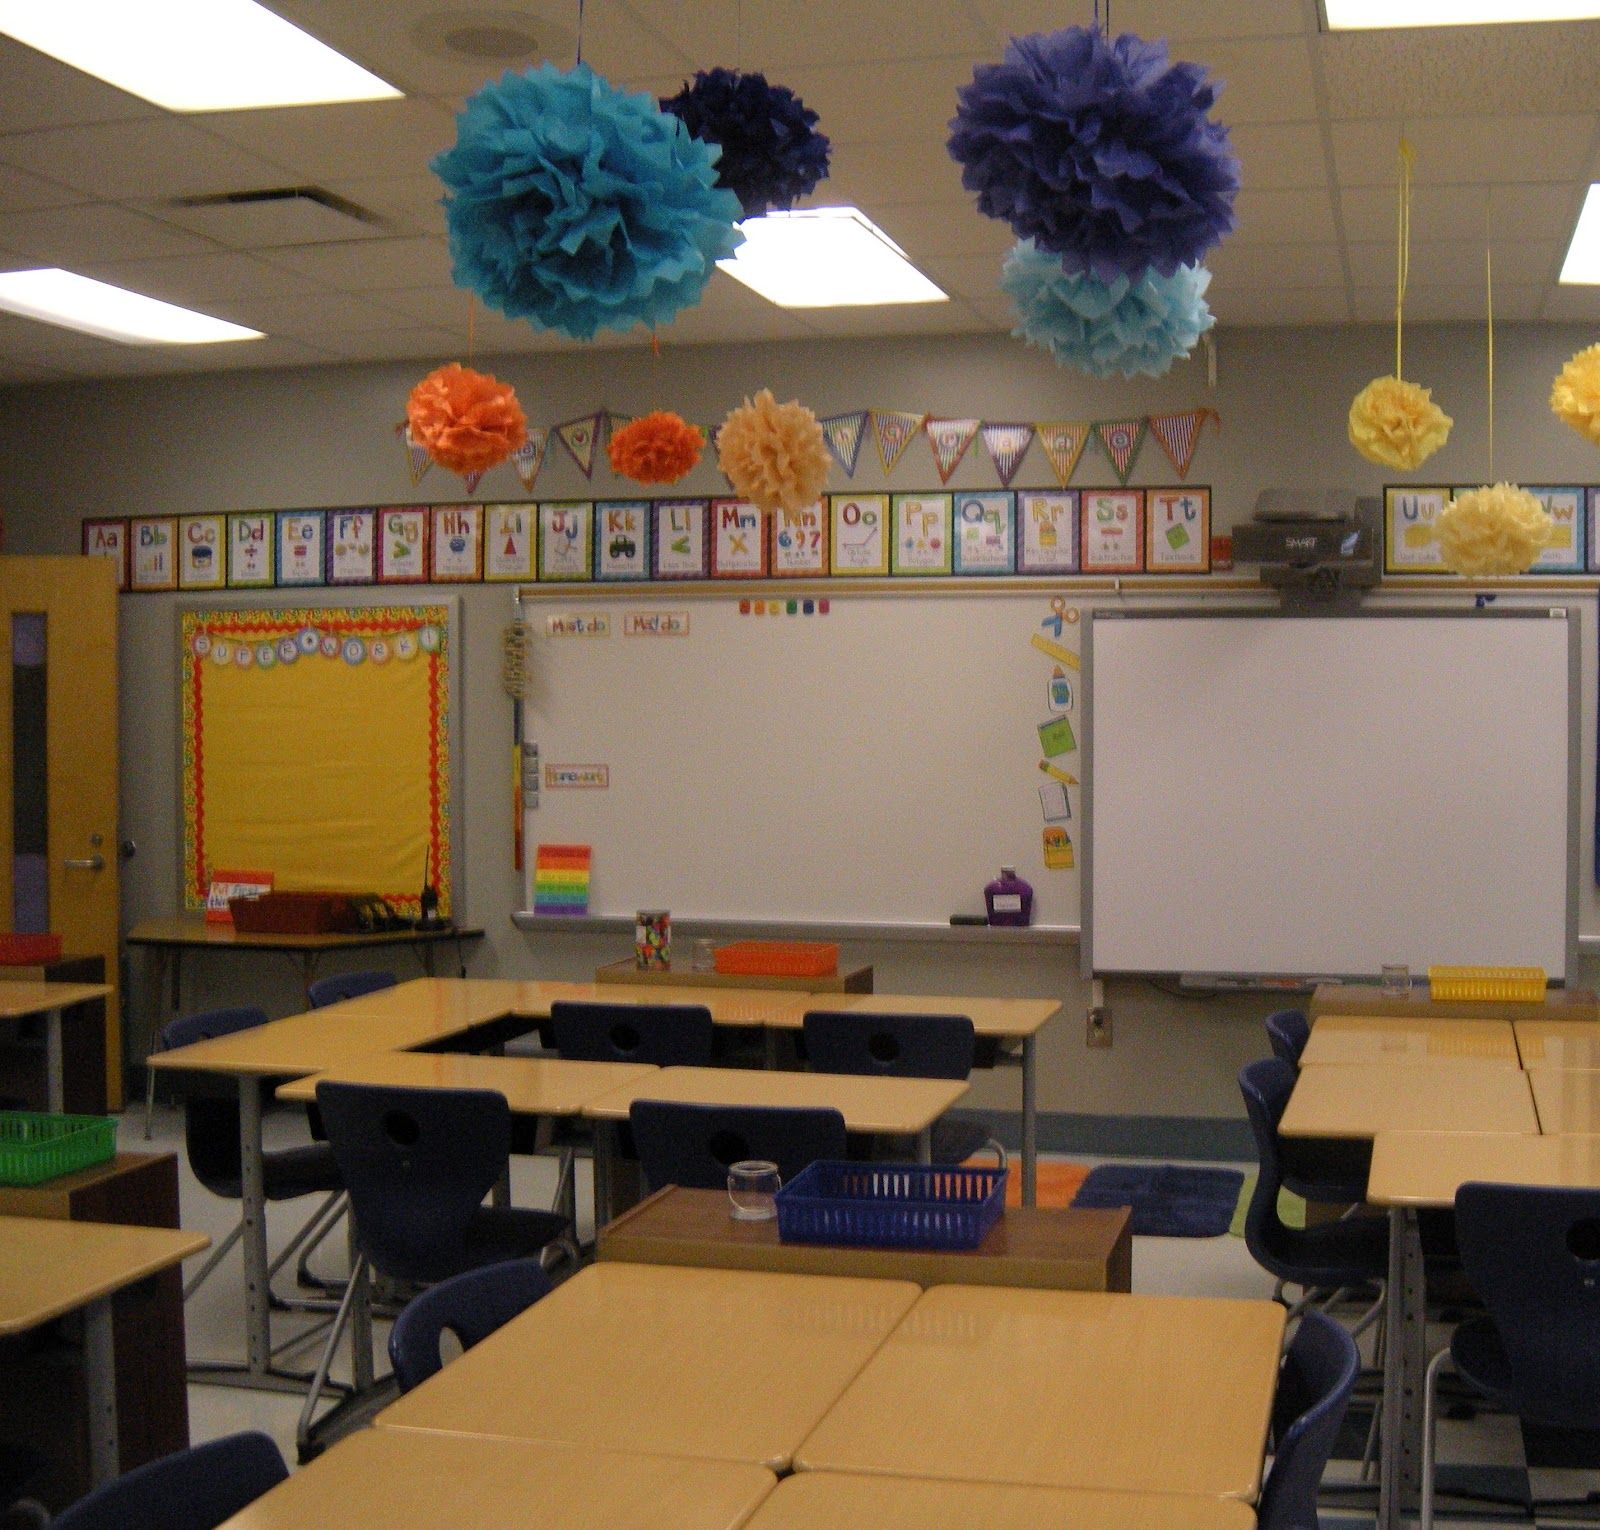 Doing Activity of Decorating with Classroom Decoration ... -   Awesome High School Classroom Design Ideas